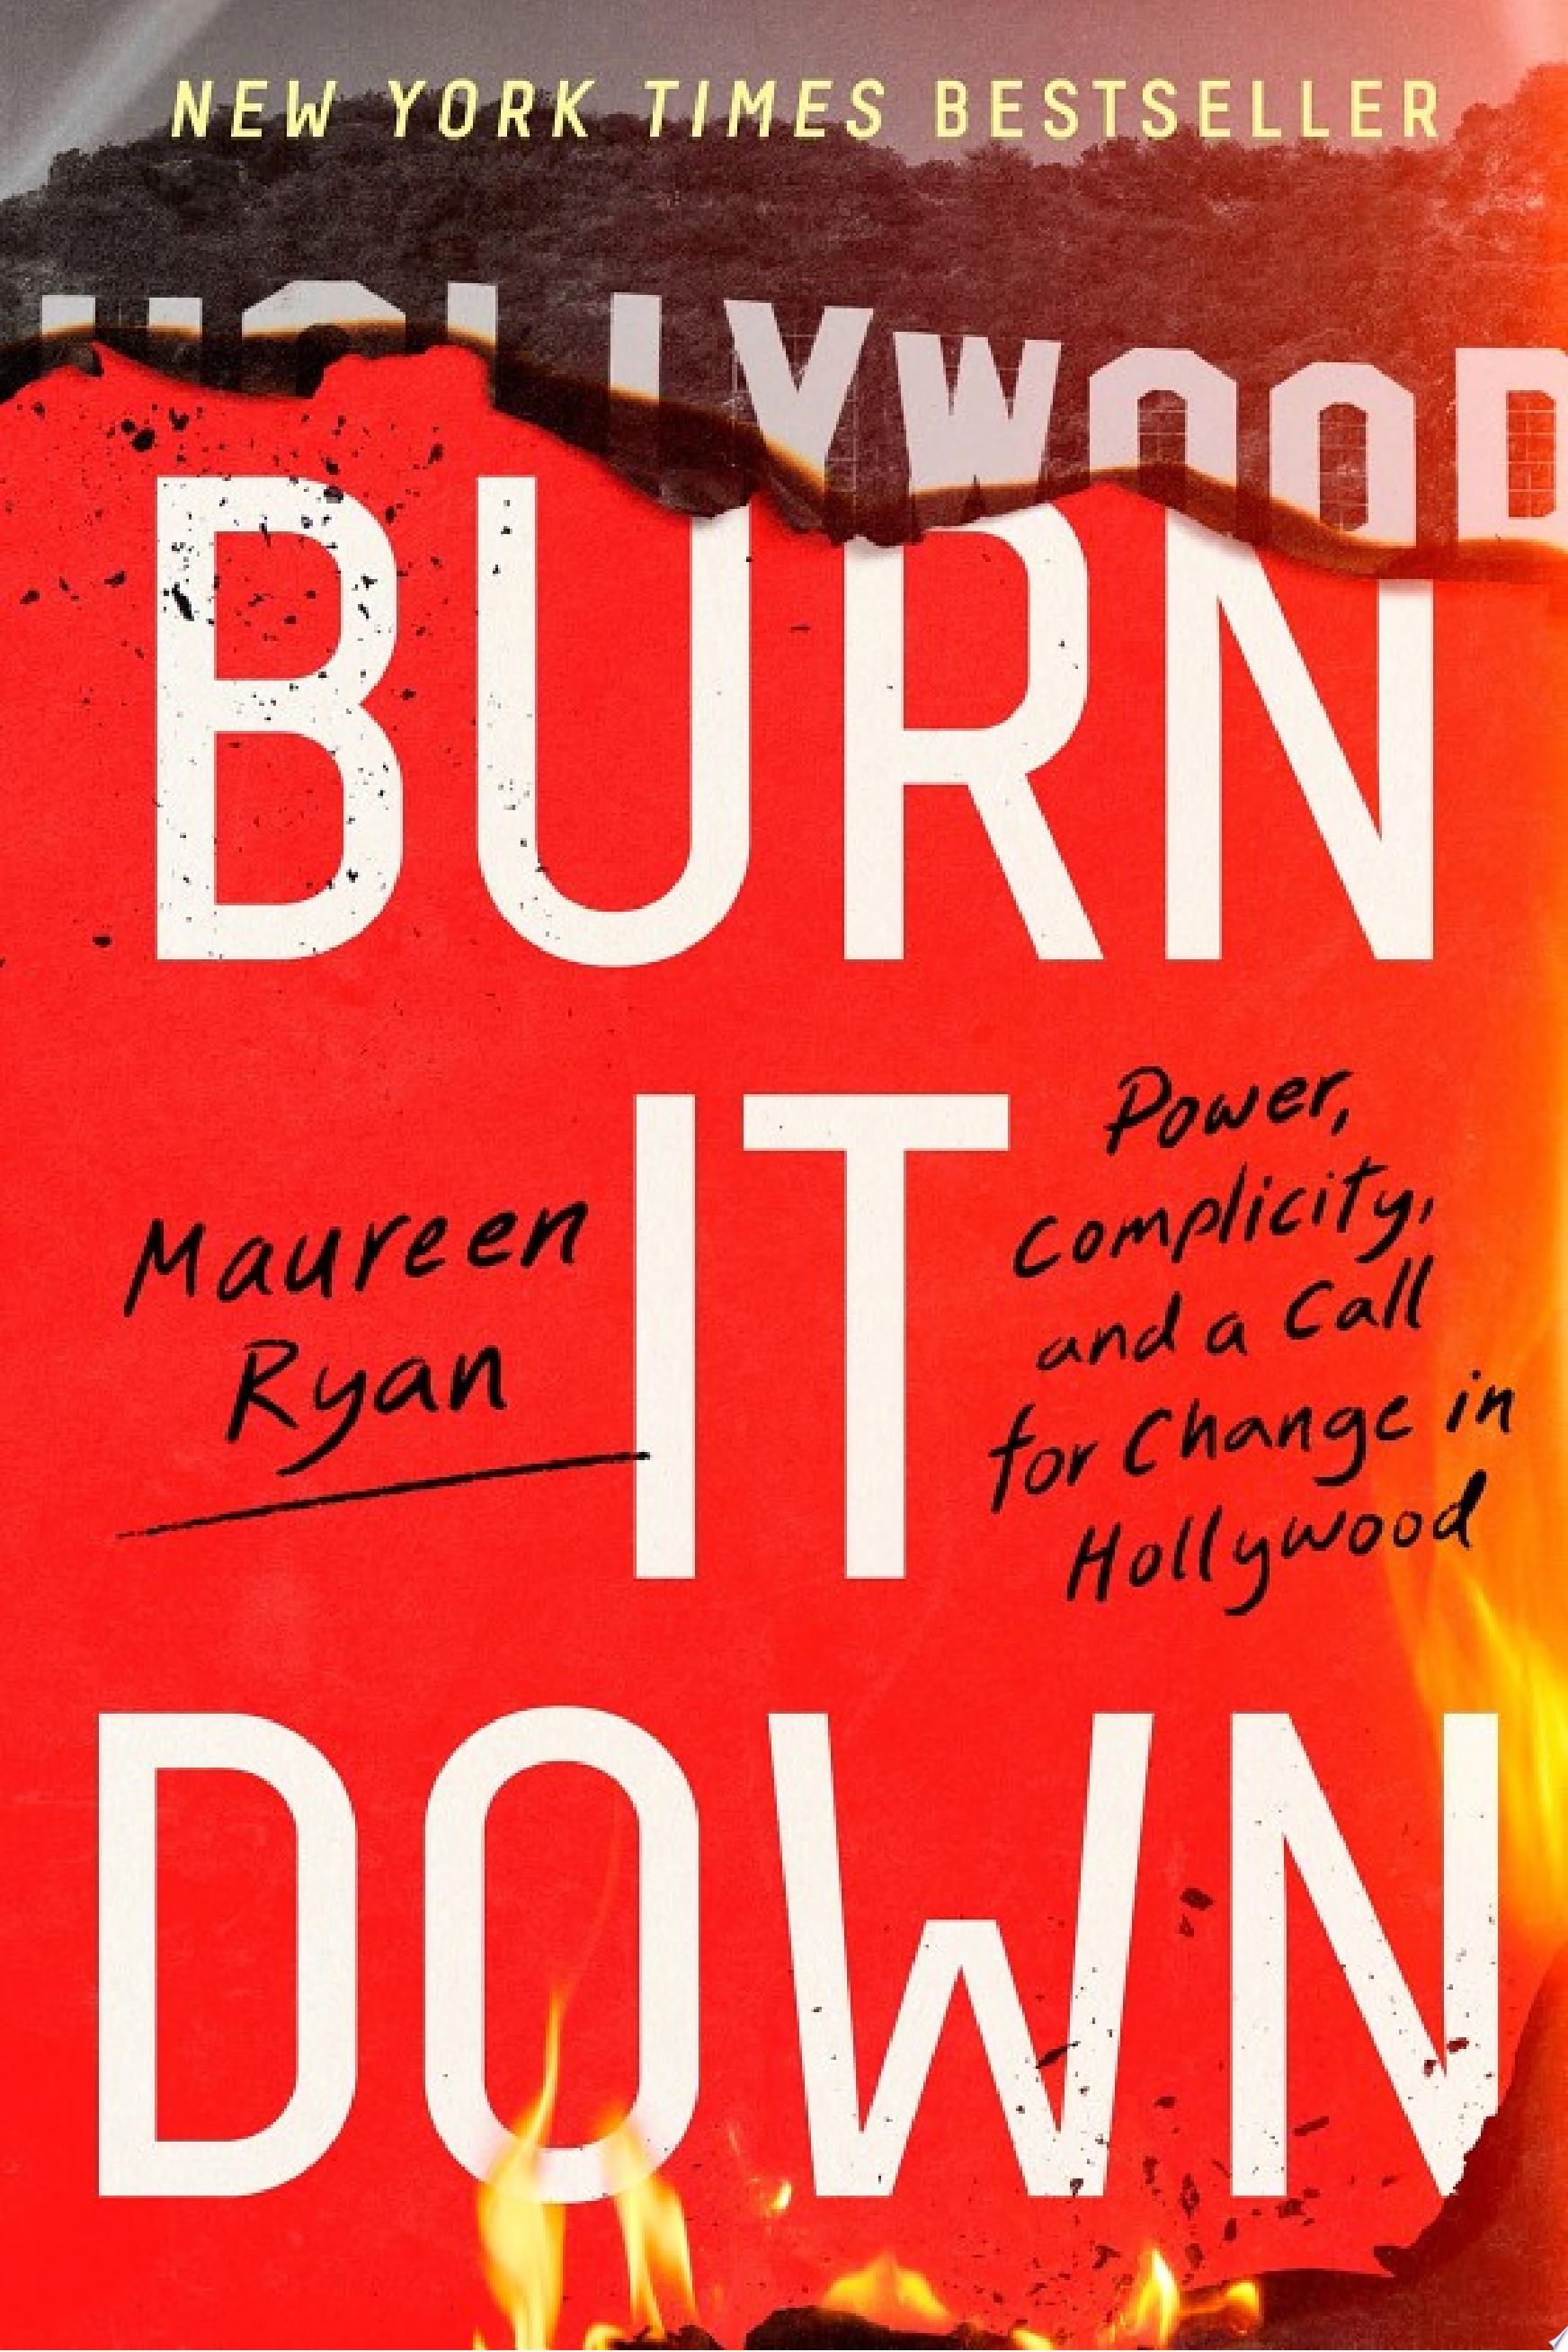 Image for "Burn It Down"